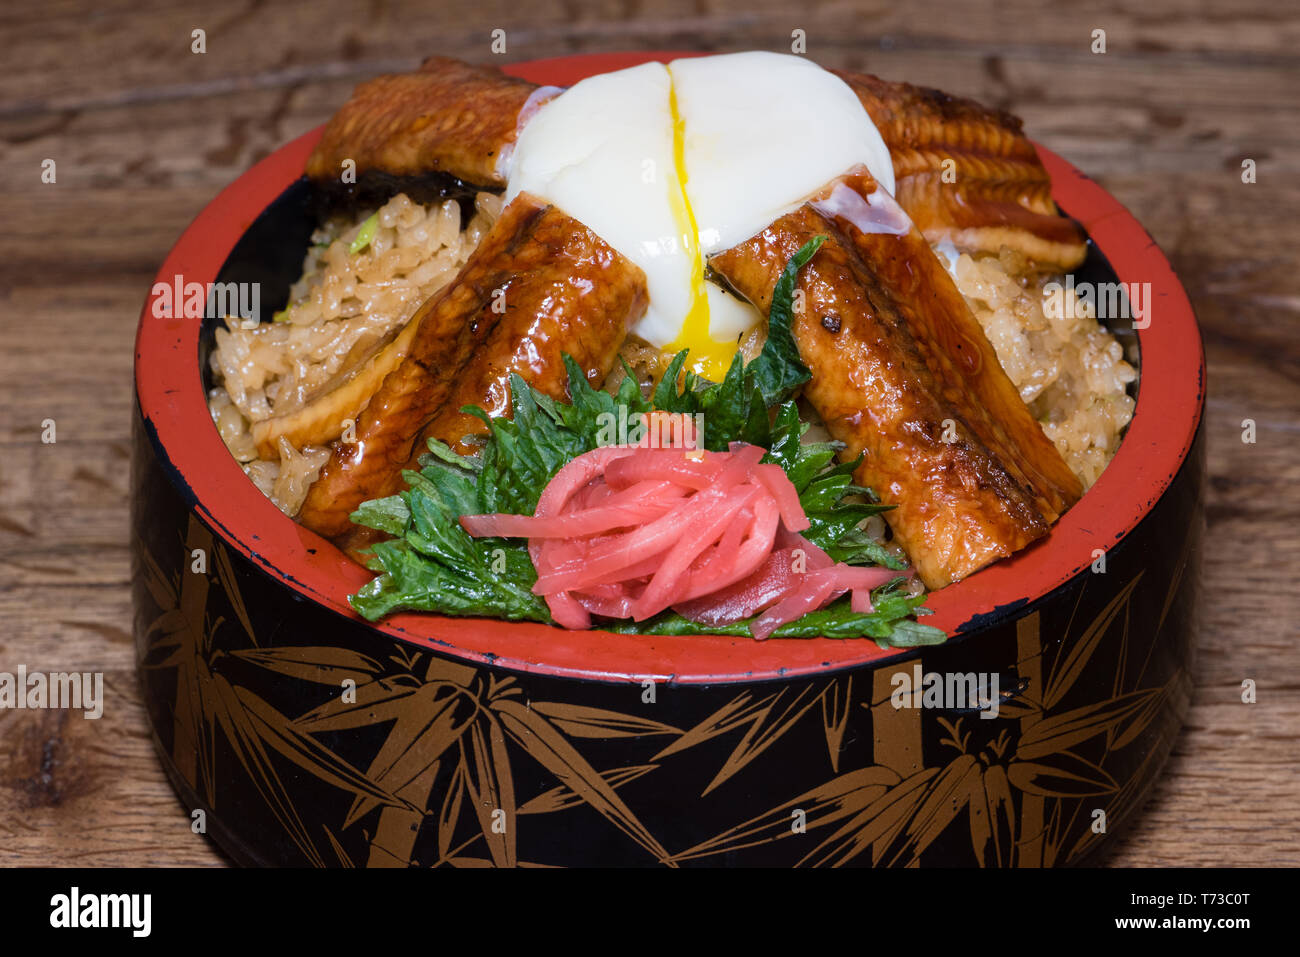 Japanese fusion dish with spicy rice with tamari sauce, roasted eel, egg and red turnip, in a decorated bowl, dark wood table background Stock Photo